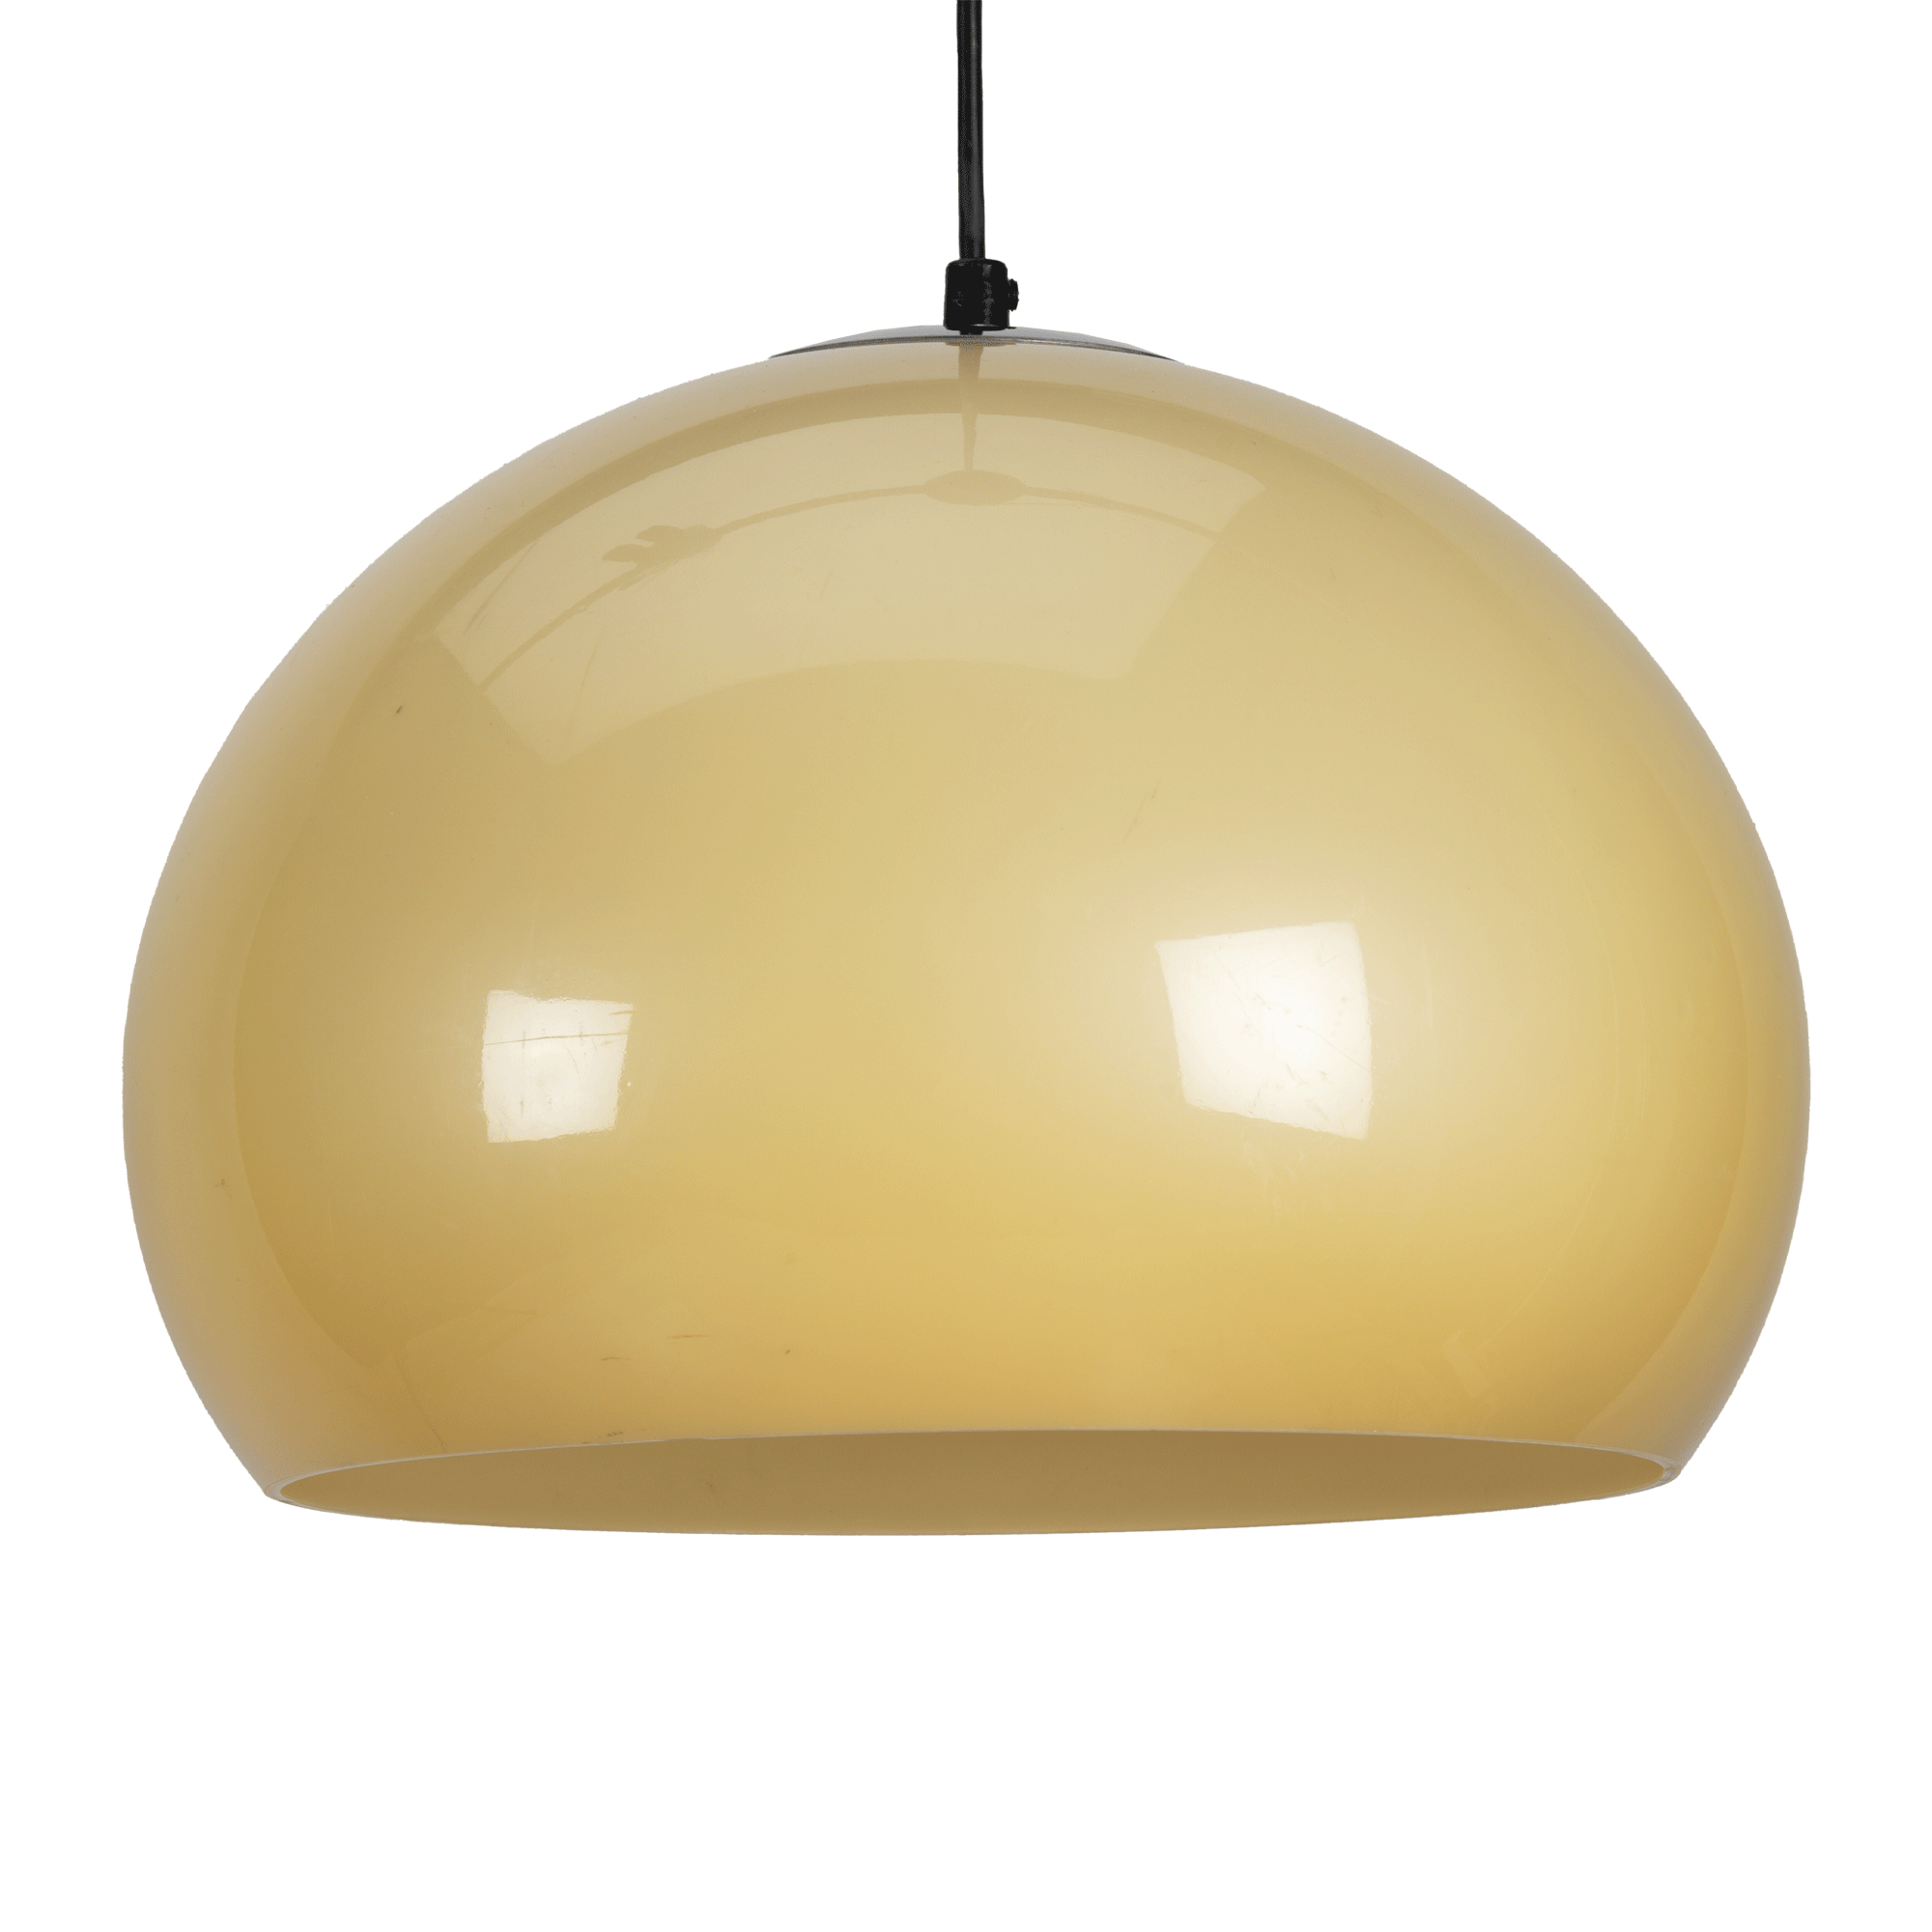 Brown space age pendant lamp